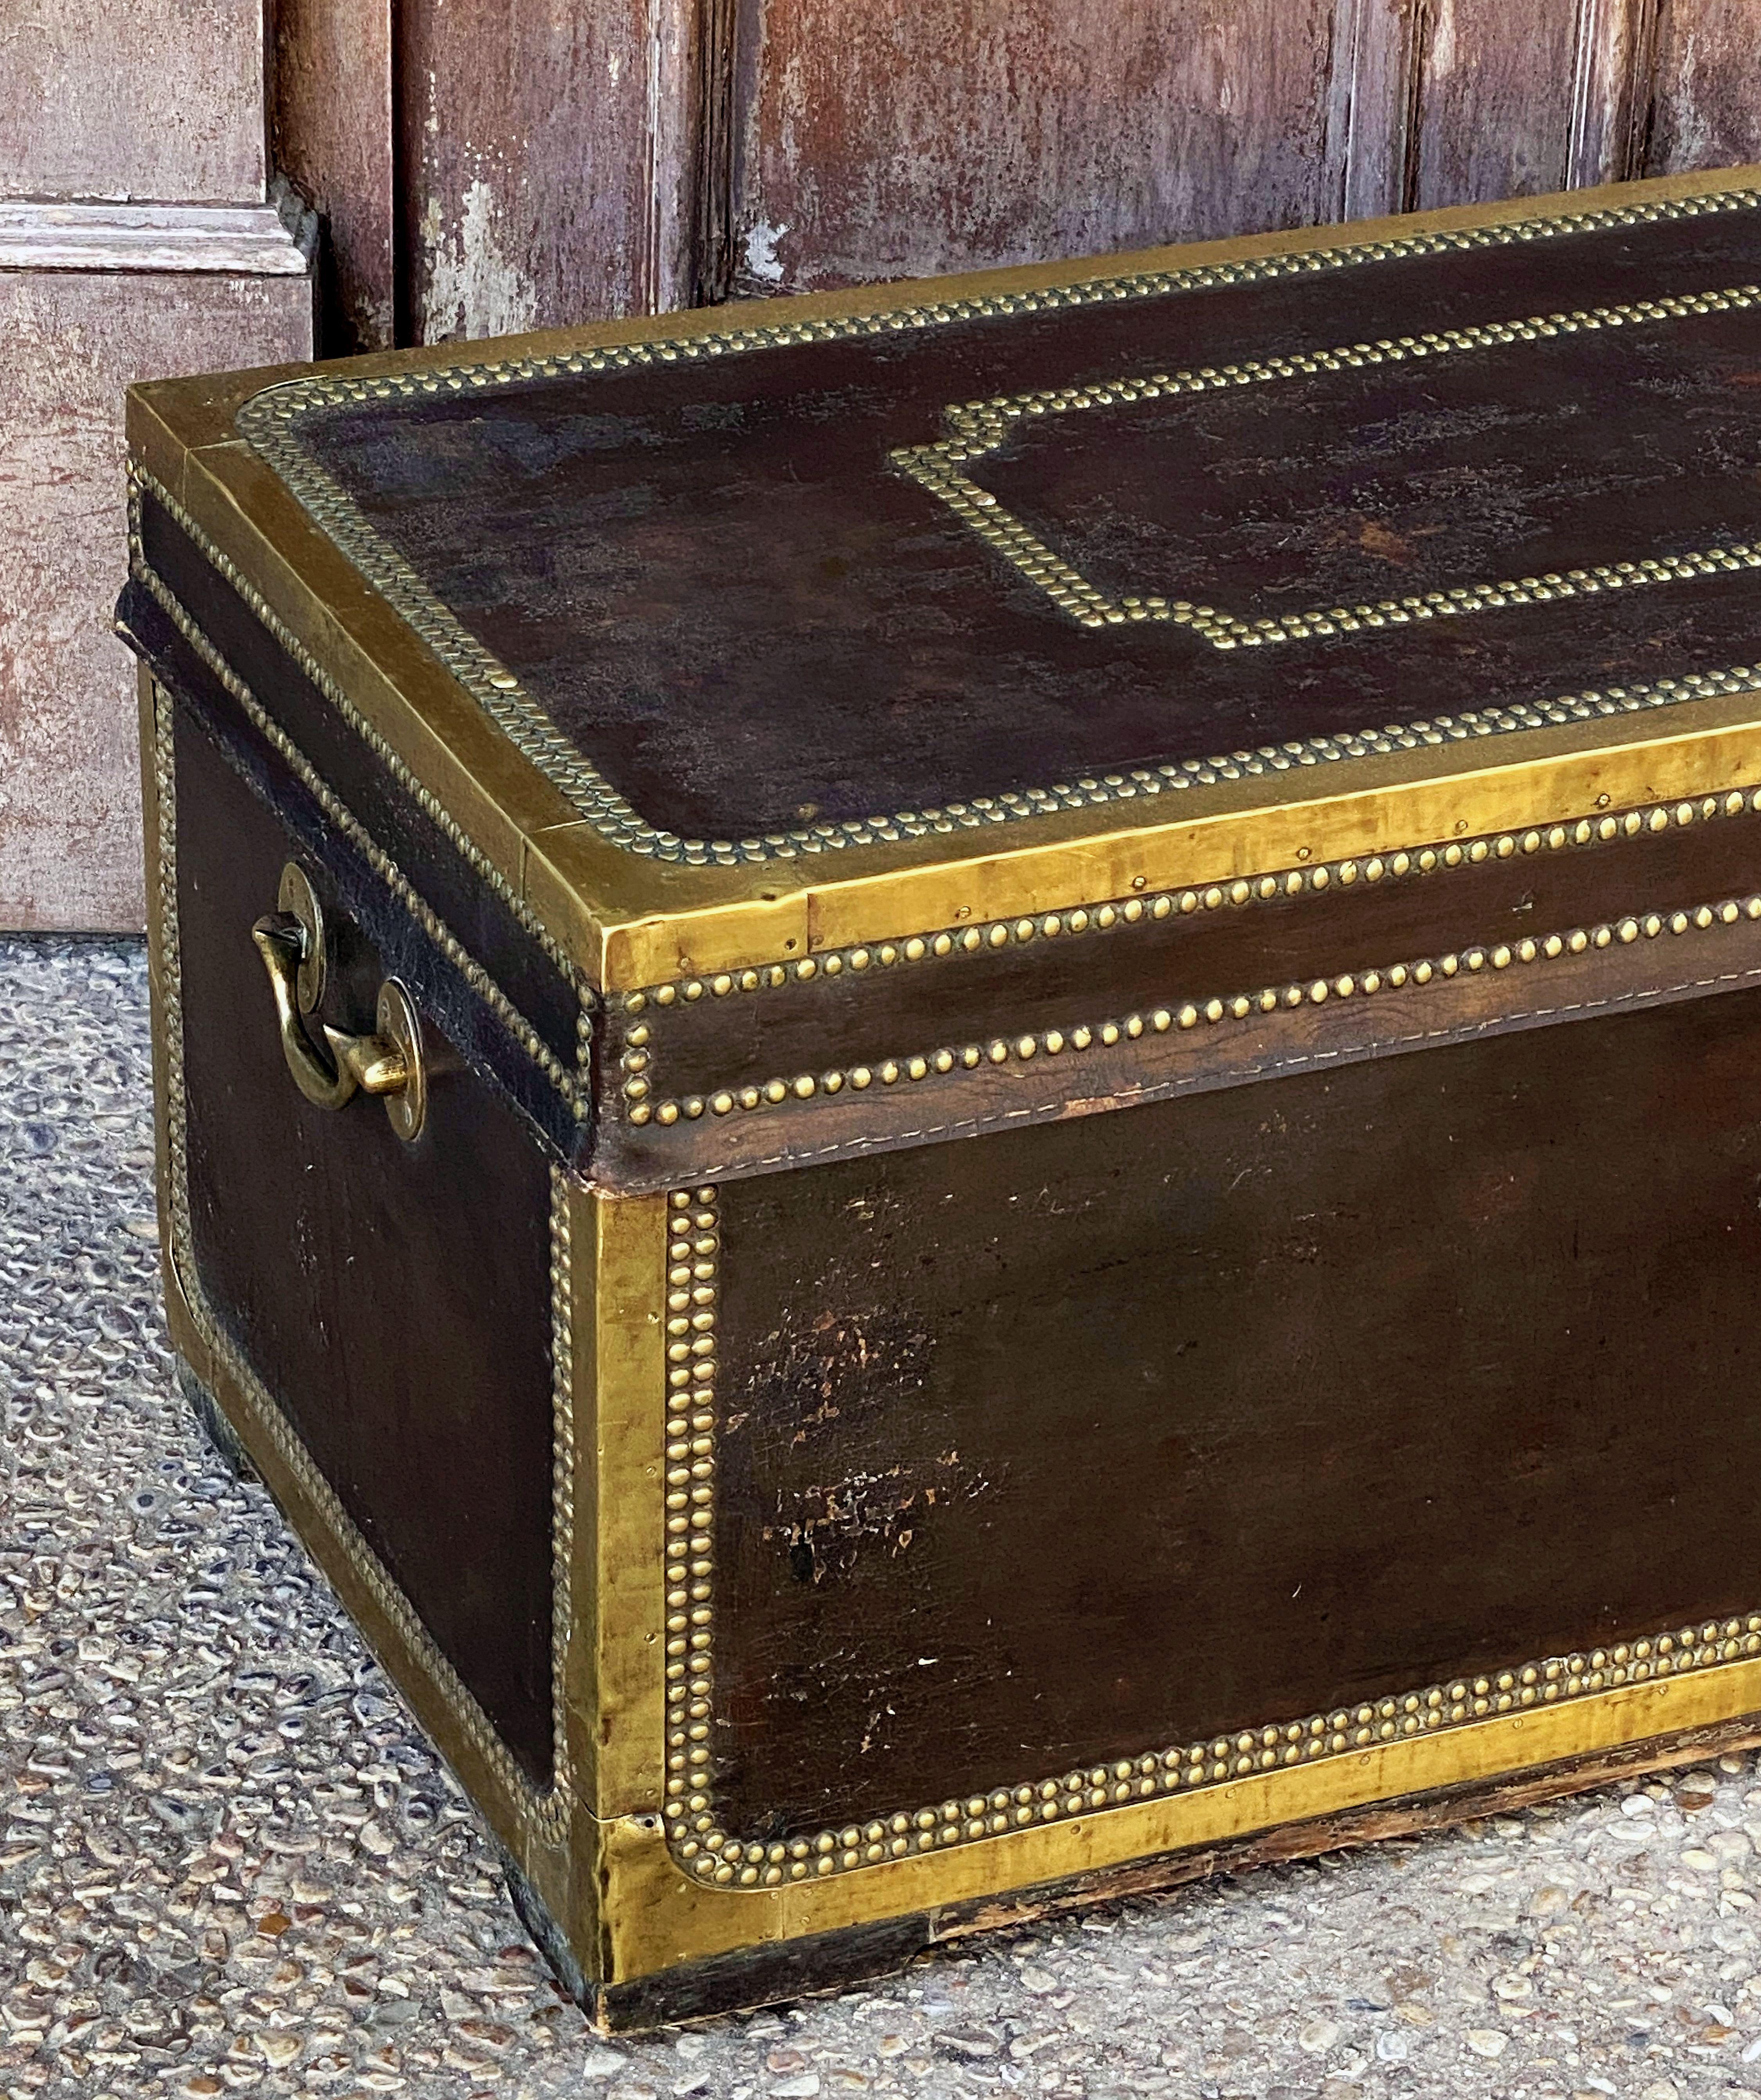 English Campaign Trunk of Brass-Bound Leather and Camphor Wood, Circa 1820 4